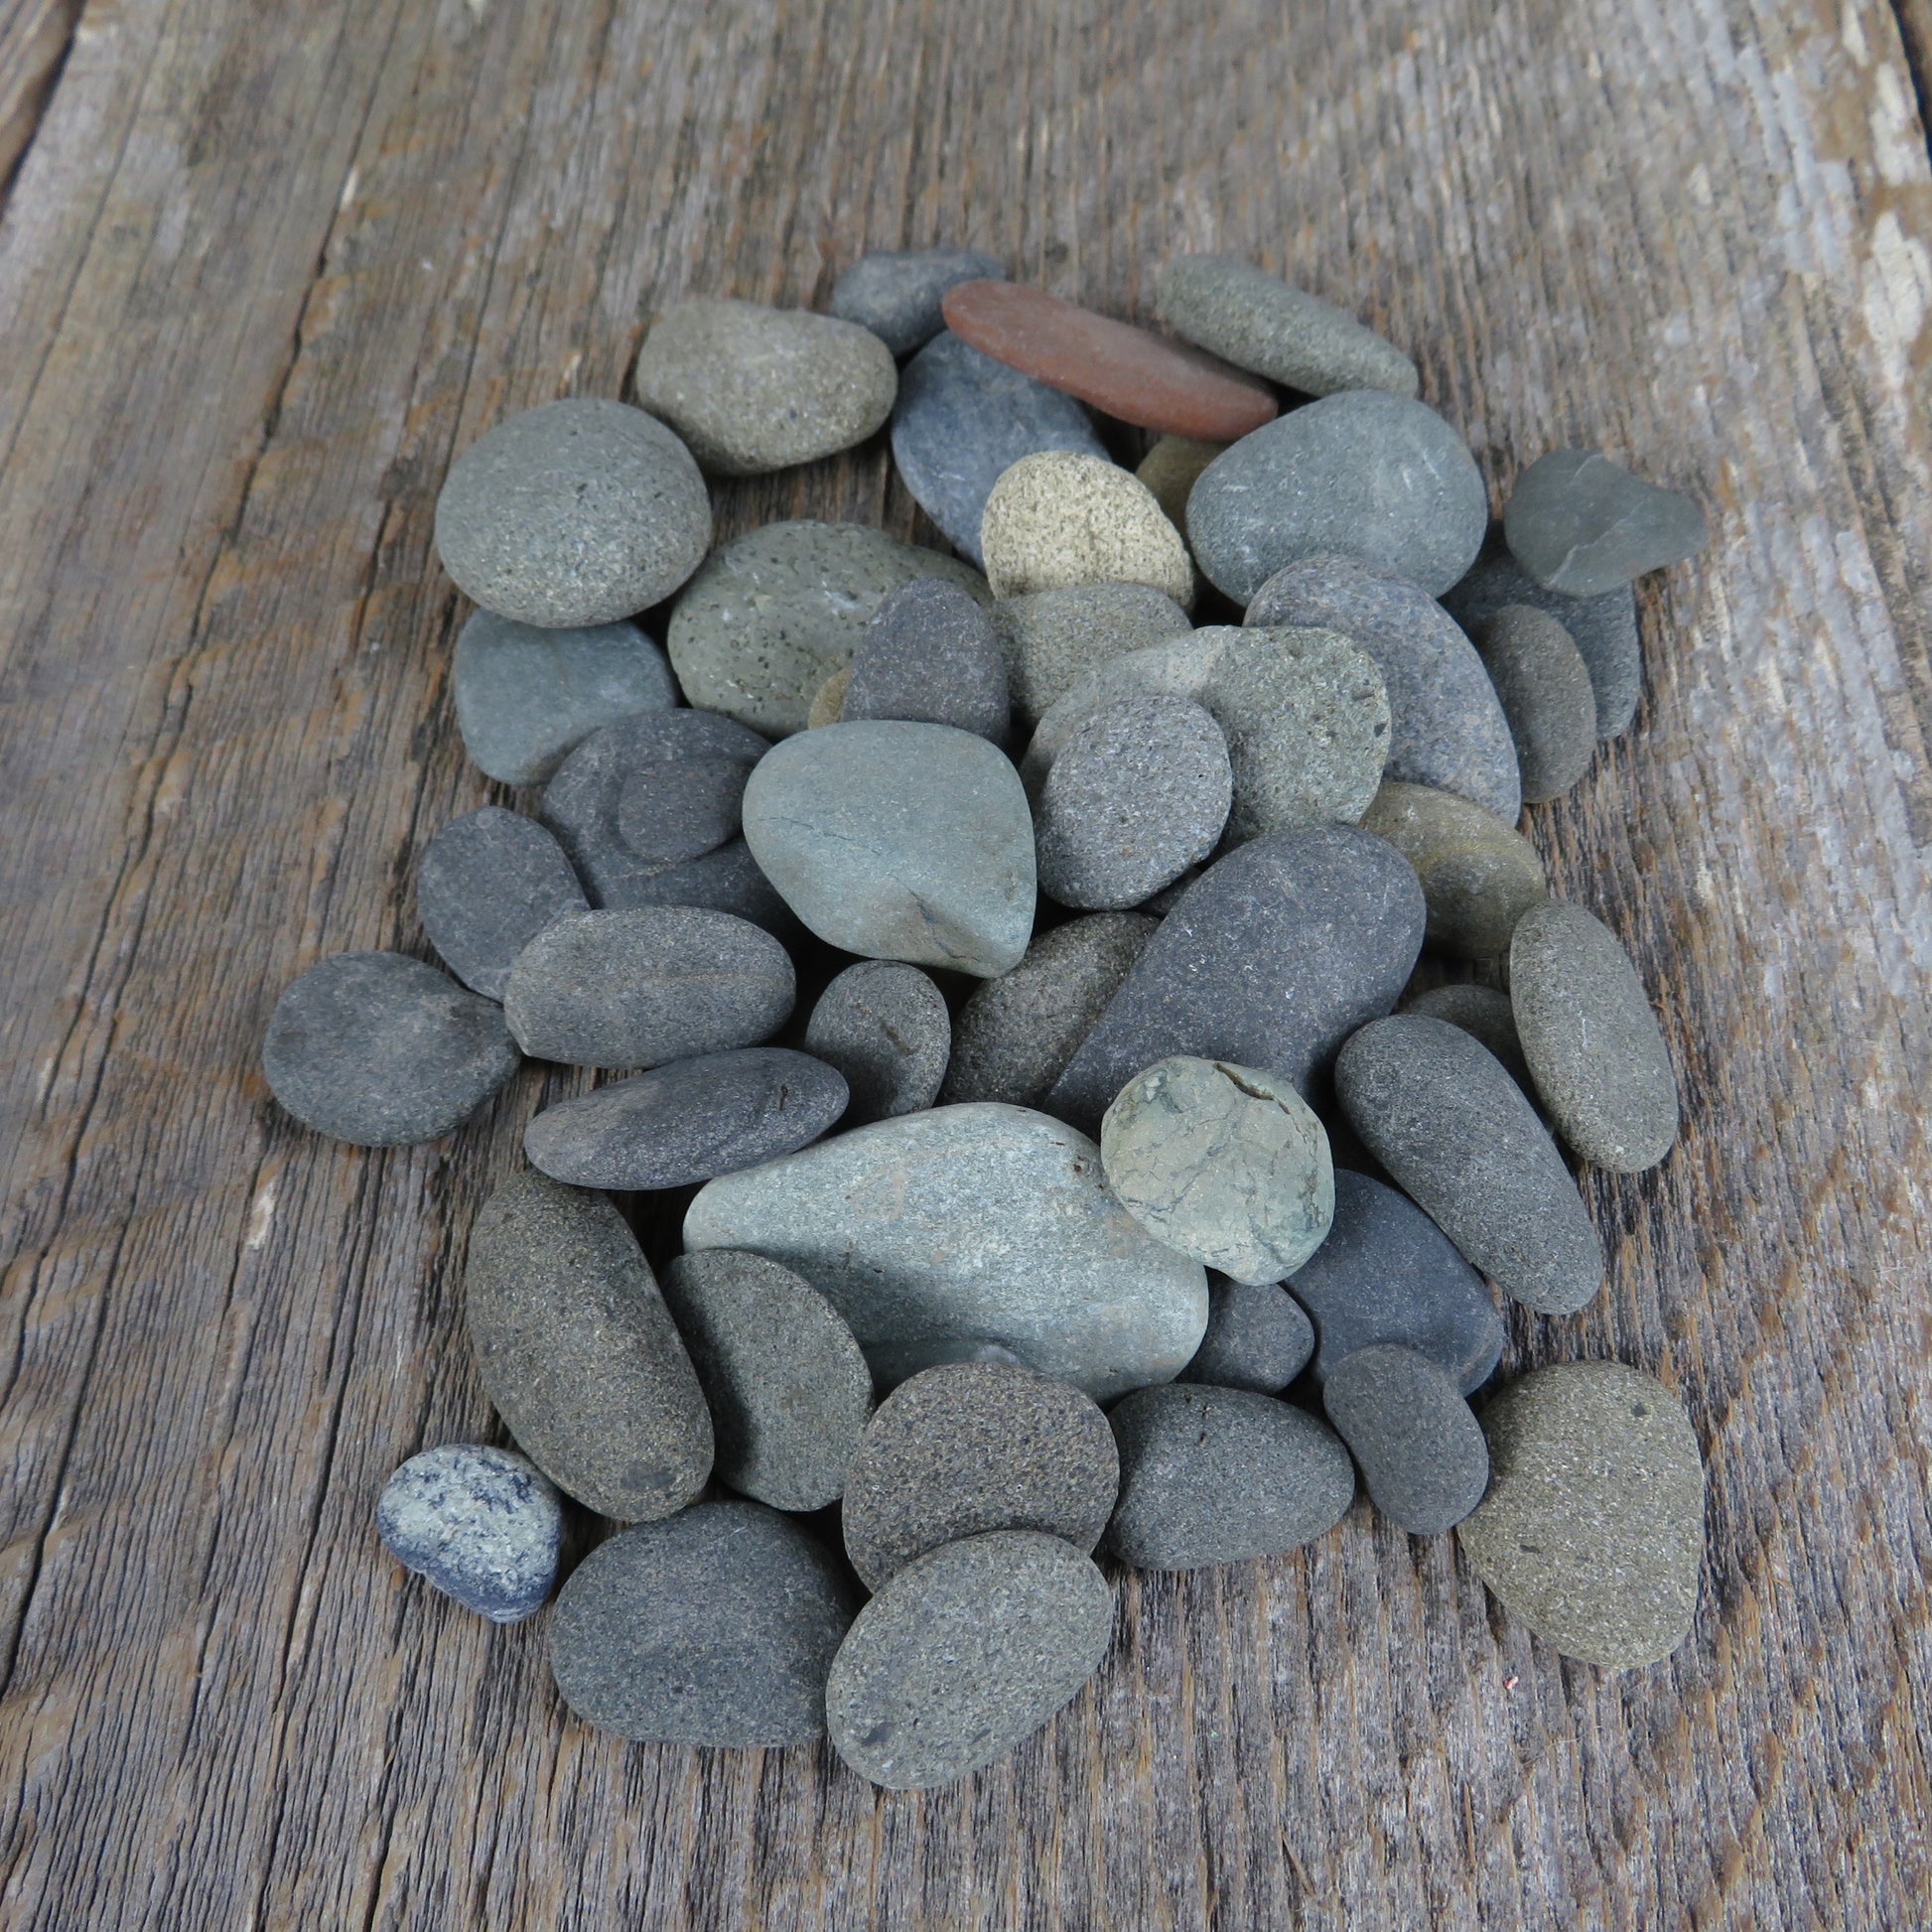 Garden Rock Path Stone Wall Ground Cover River Flat Stacking Rocks Craft Pebbles Fairy Village Miniature Dollhouse - At Grandma's Table